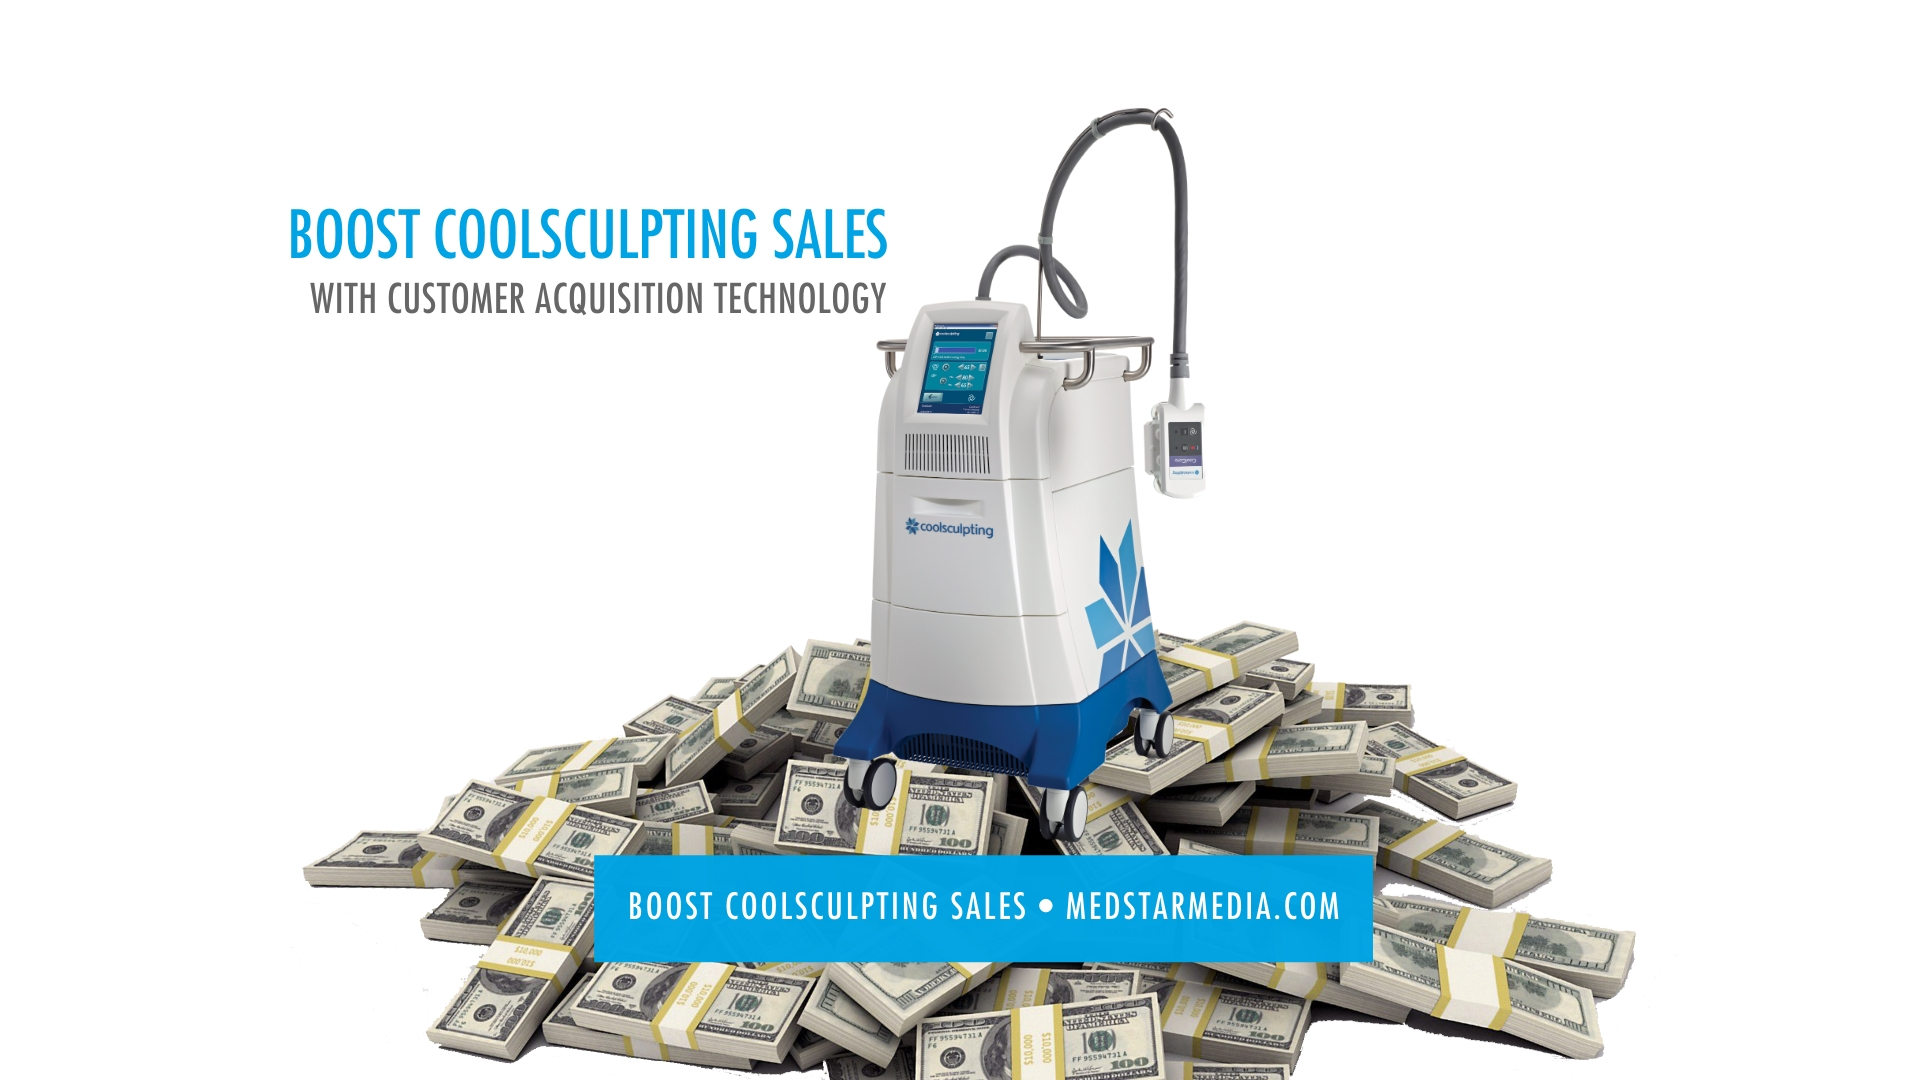 5 TIPS TO SELL MORE COOLSCULPTING